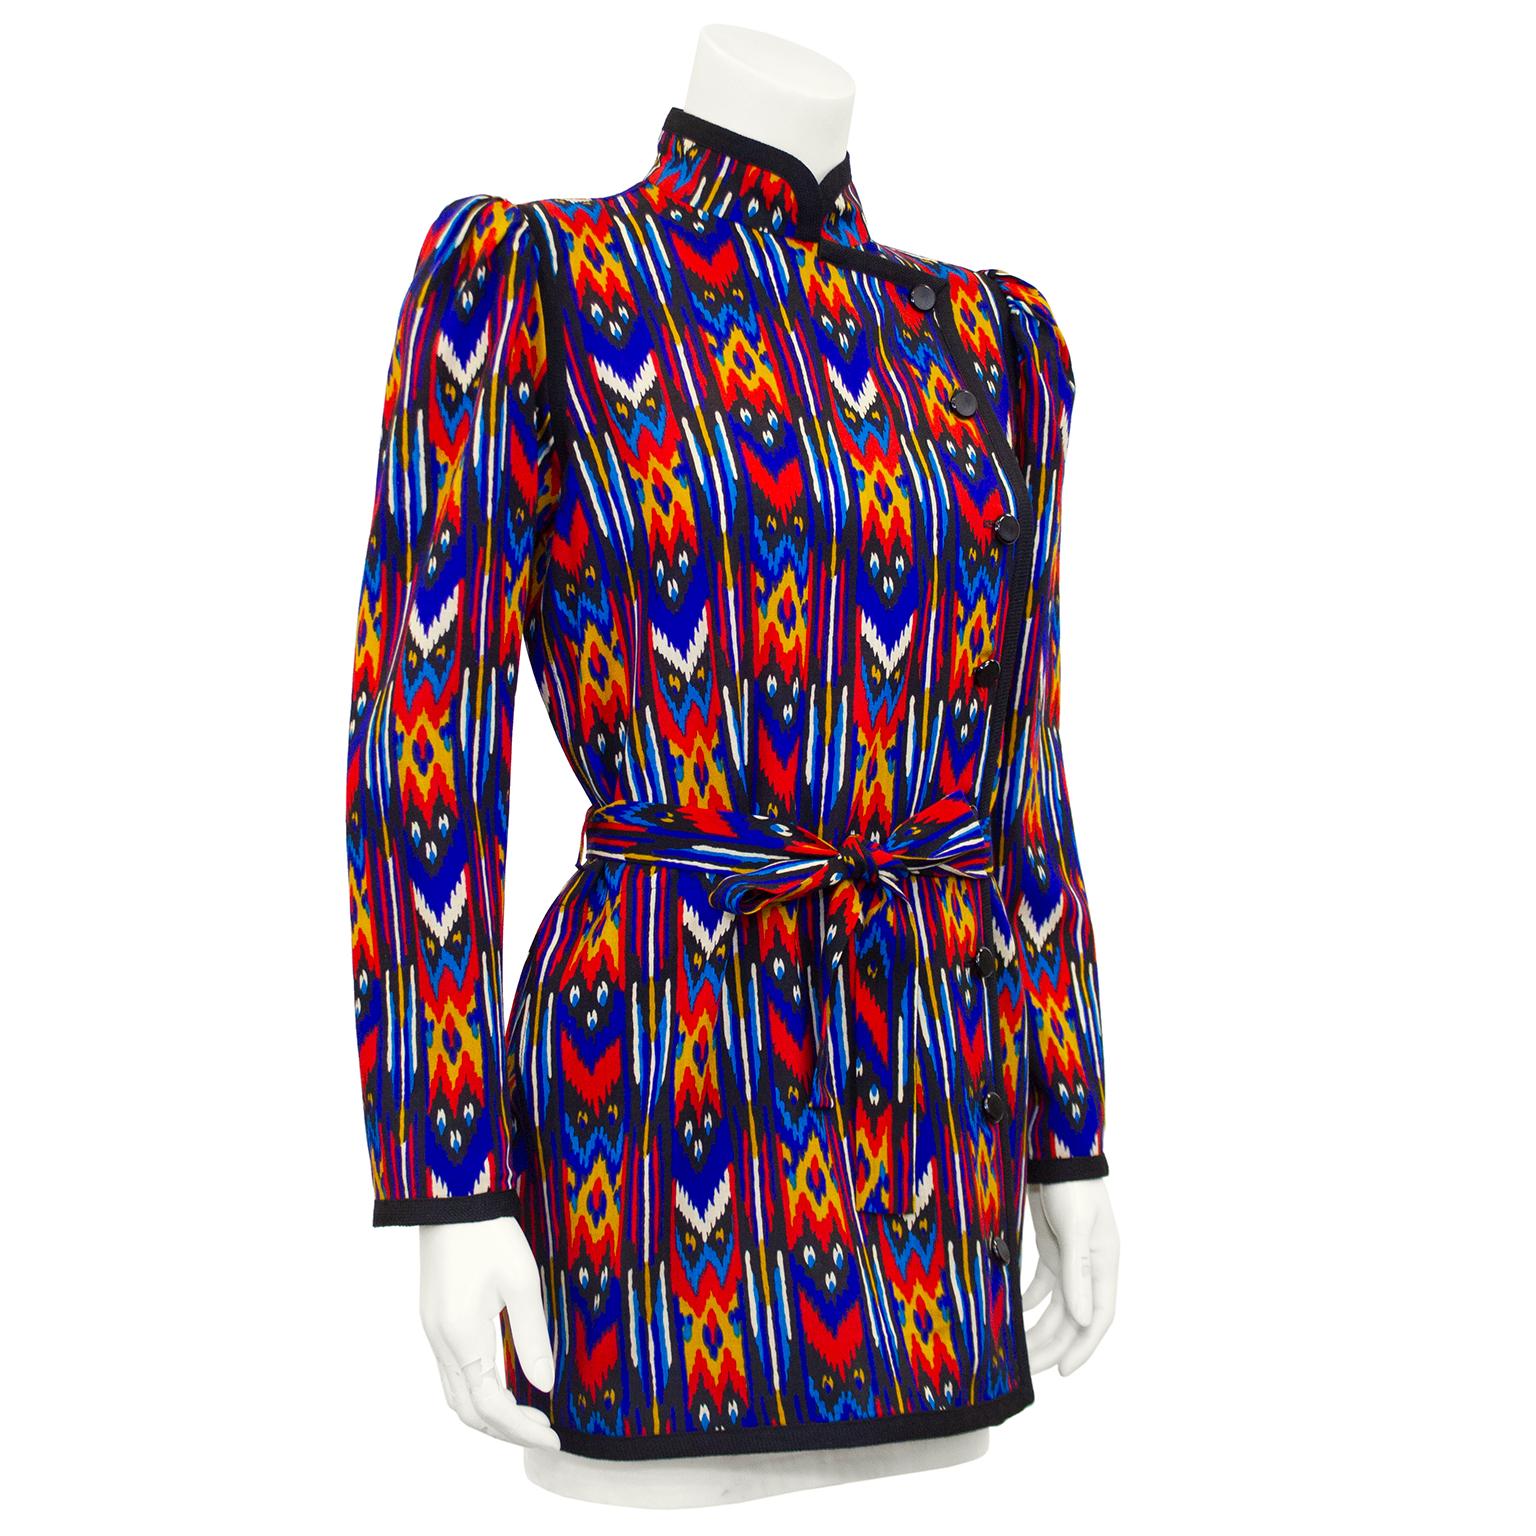 Yves Saint Laurent Rive Gauche very lightweight cotton jacket from the early 1980s. Bright blue, orange and yellow all over Navajo print. Long sleeve with Mandarin collar and optional matching belt. Black trim and black round plastic buttons up left